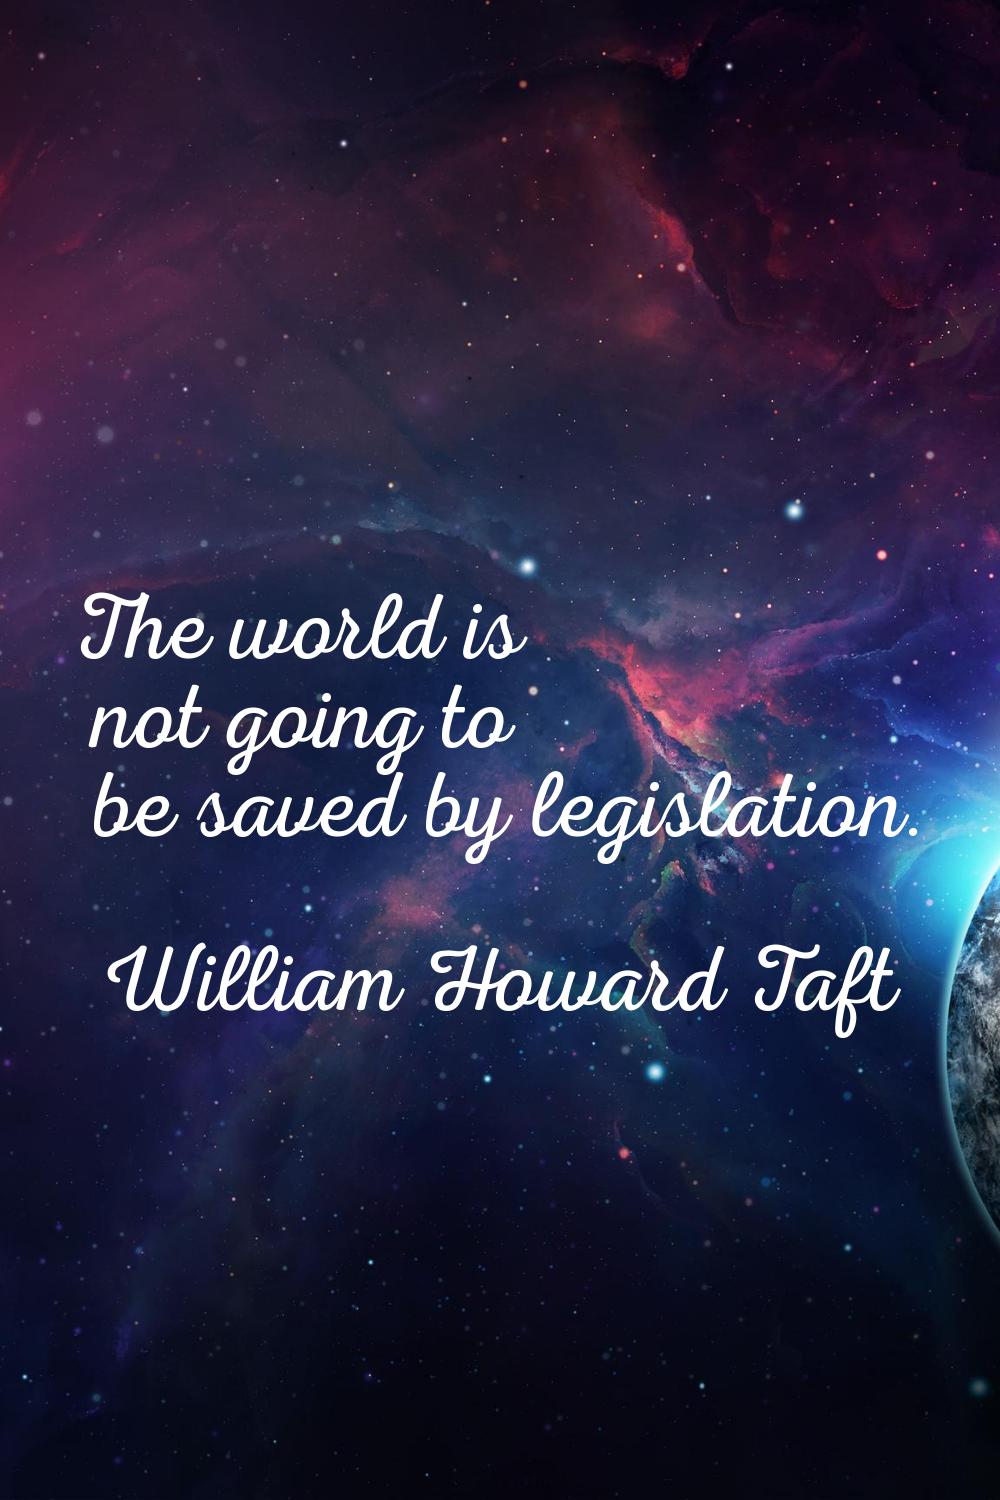 The world is not going to be saved by legislation.